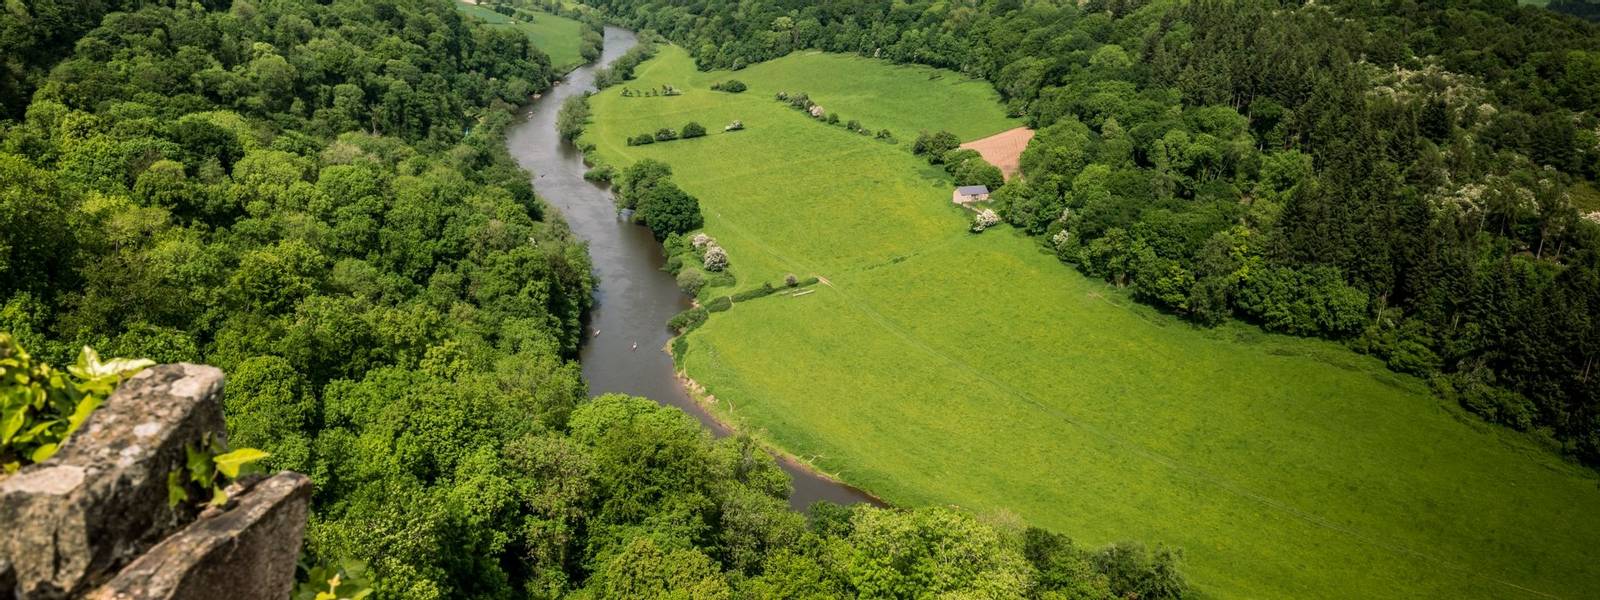 View of the river wye as the wye valley meanders past symonds yat rock viewpoint.